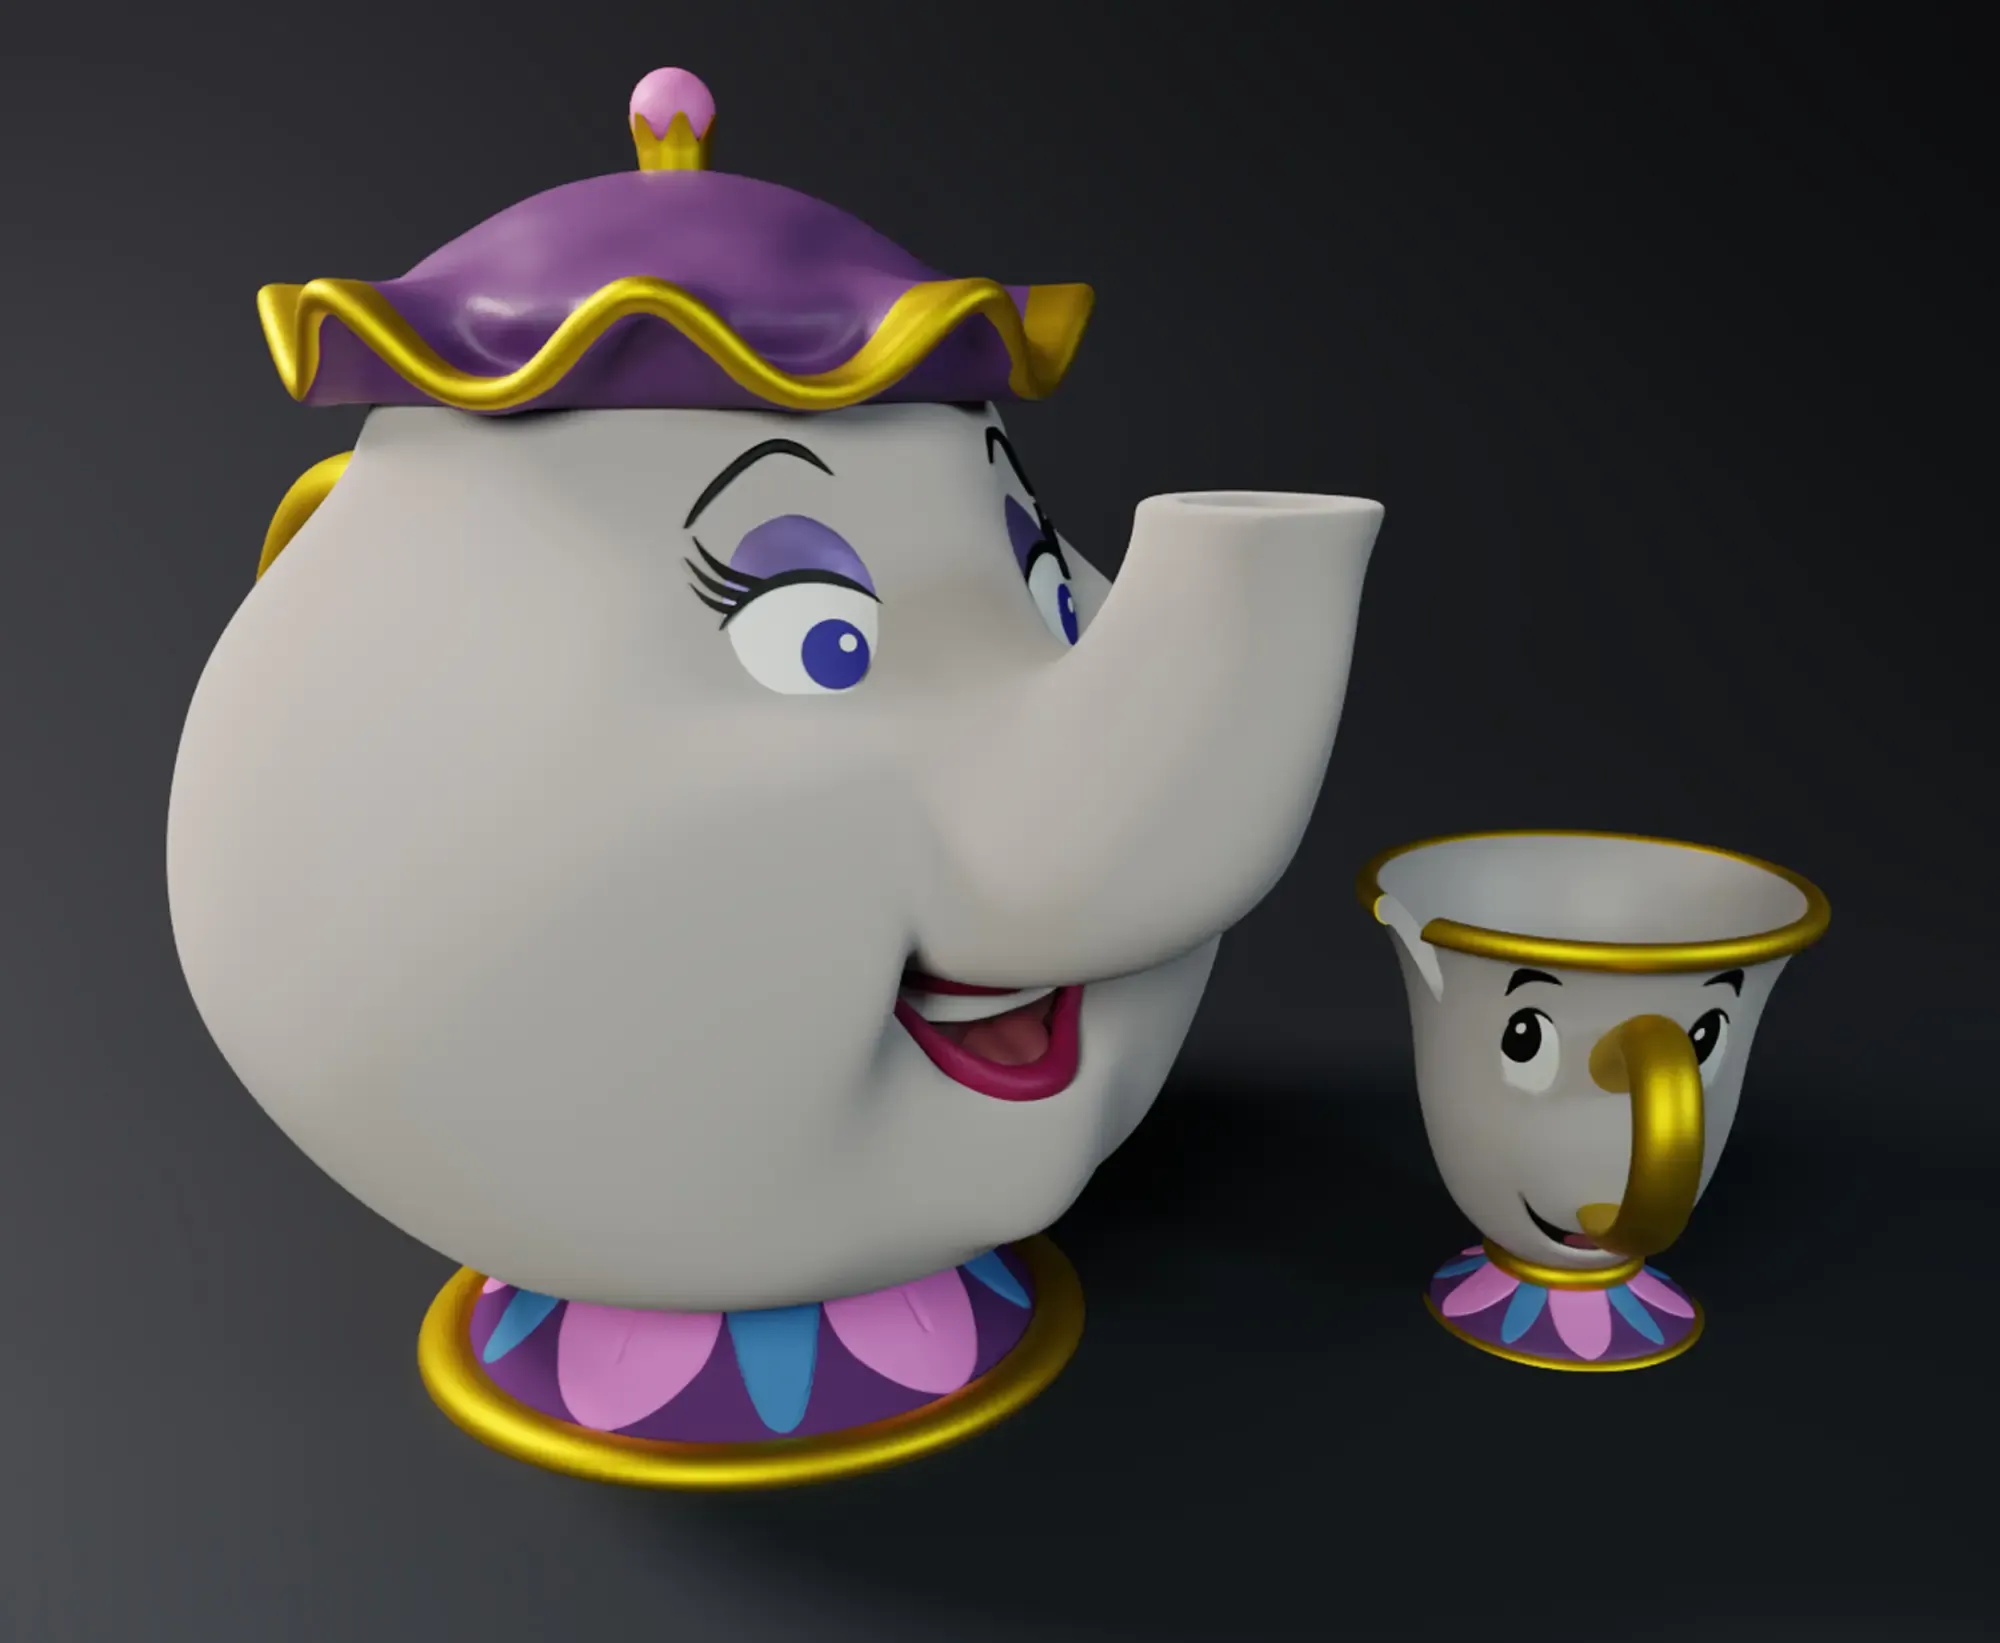 MRS POTTS AND CHIP (BEAUTY AND THE BEAST)